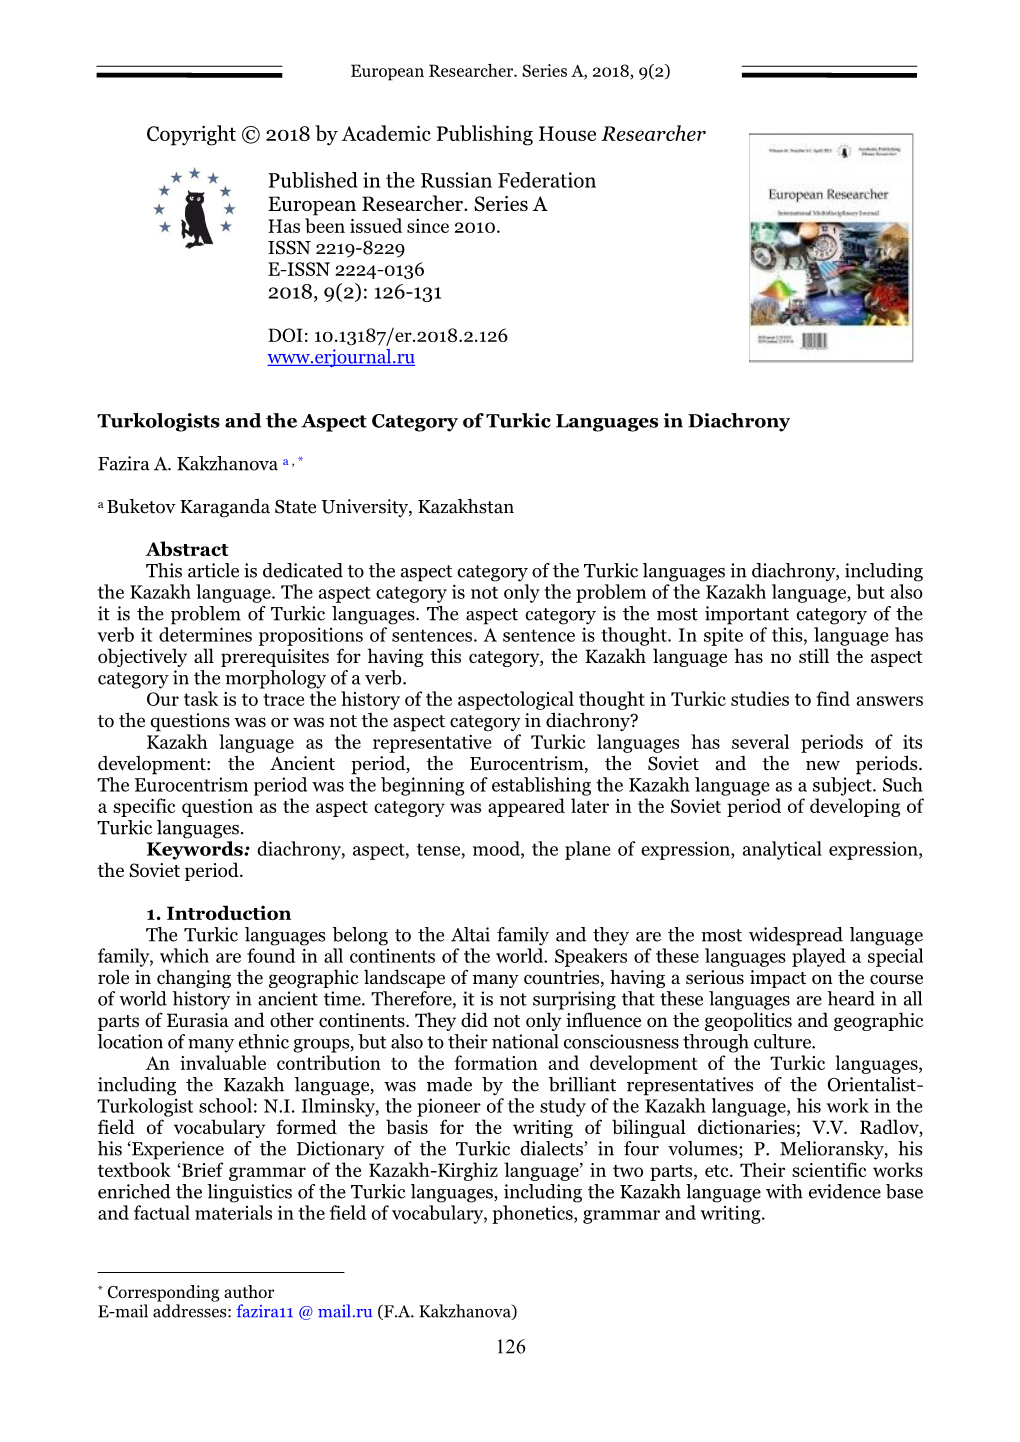 Turkologists and the Aspect Category of Turkic Languages in Diachrony